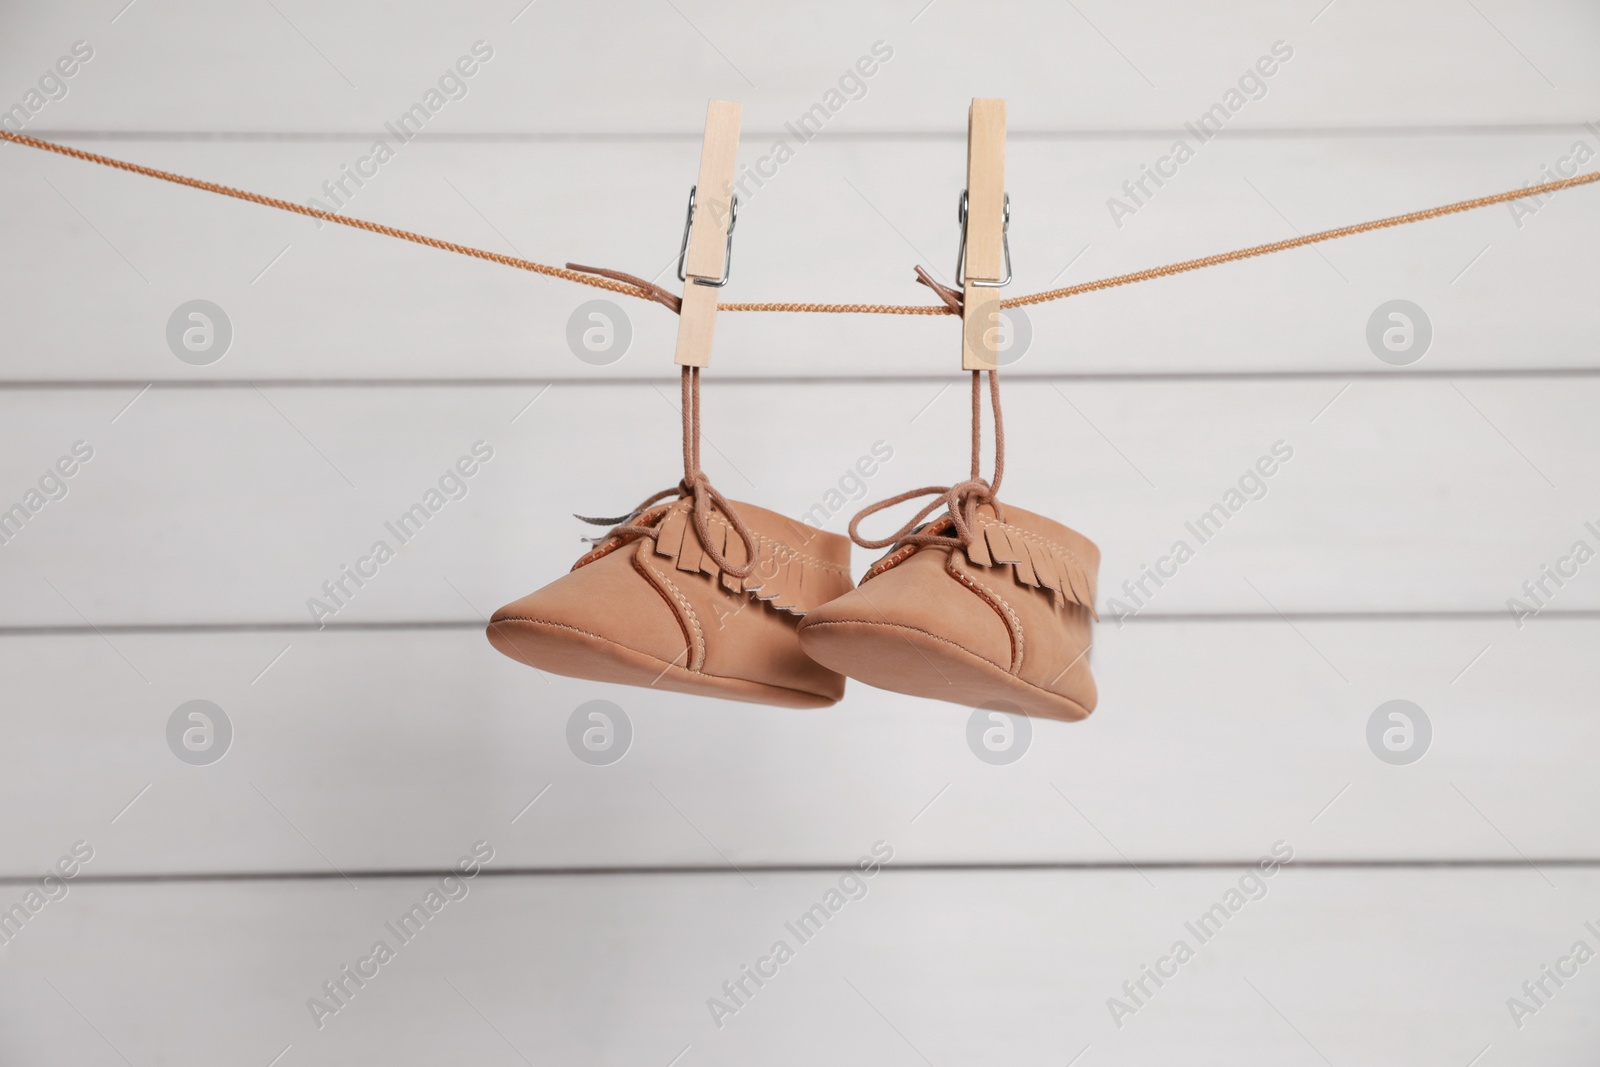 Photo of Cute baby shoes drying on washing line against white wall